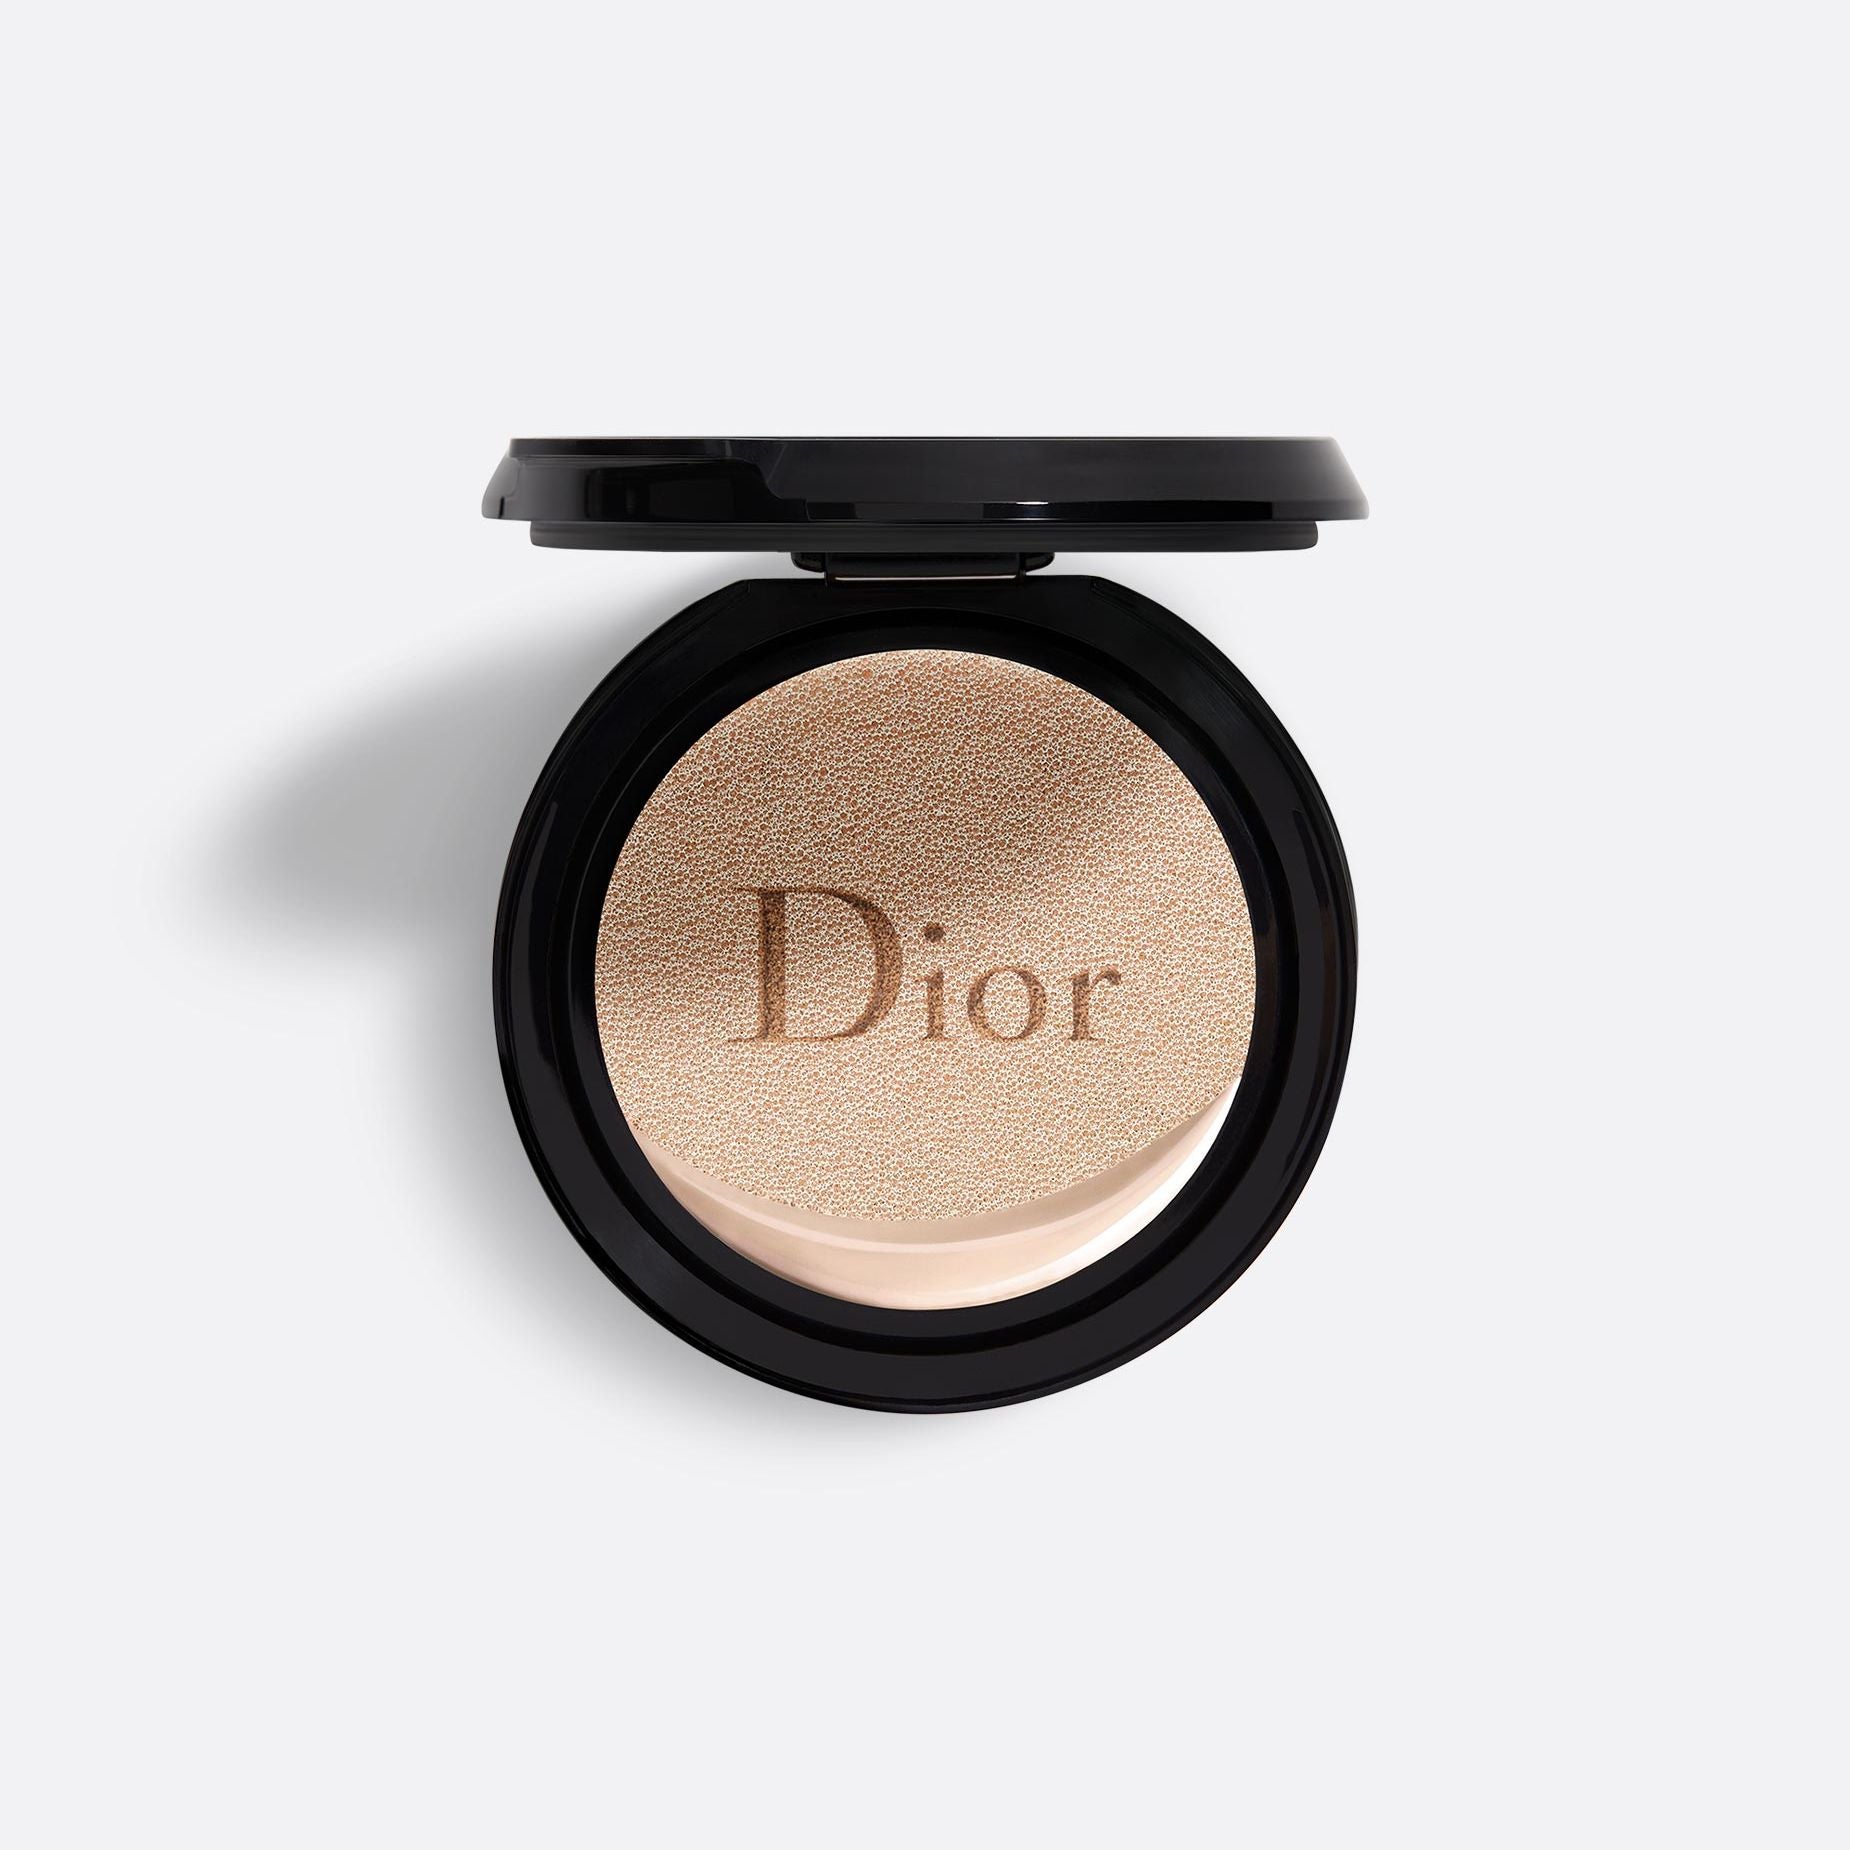 DIOR FOREVER COUTURE PERFECT CUSHION ~ 24H wear - High perfection & luminous matte finish - Skin-caring fresh foundation - 24H hydration - SPF 35 - PA+++ Refill